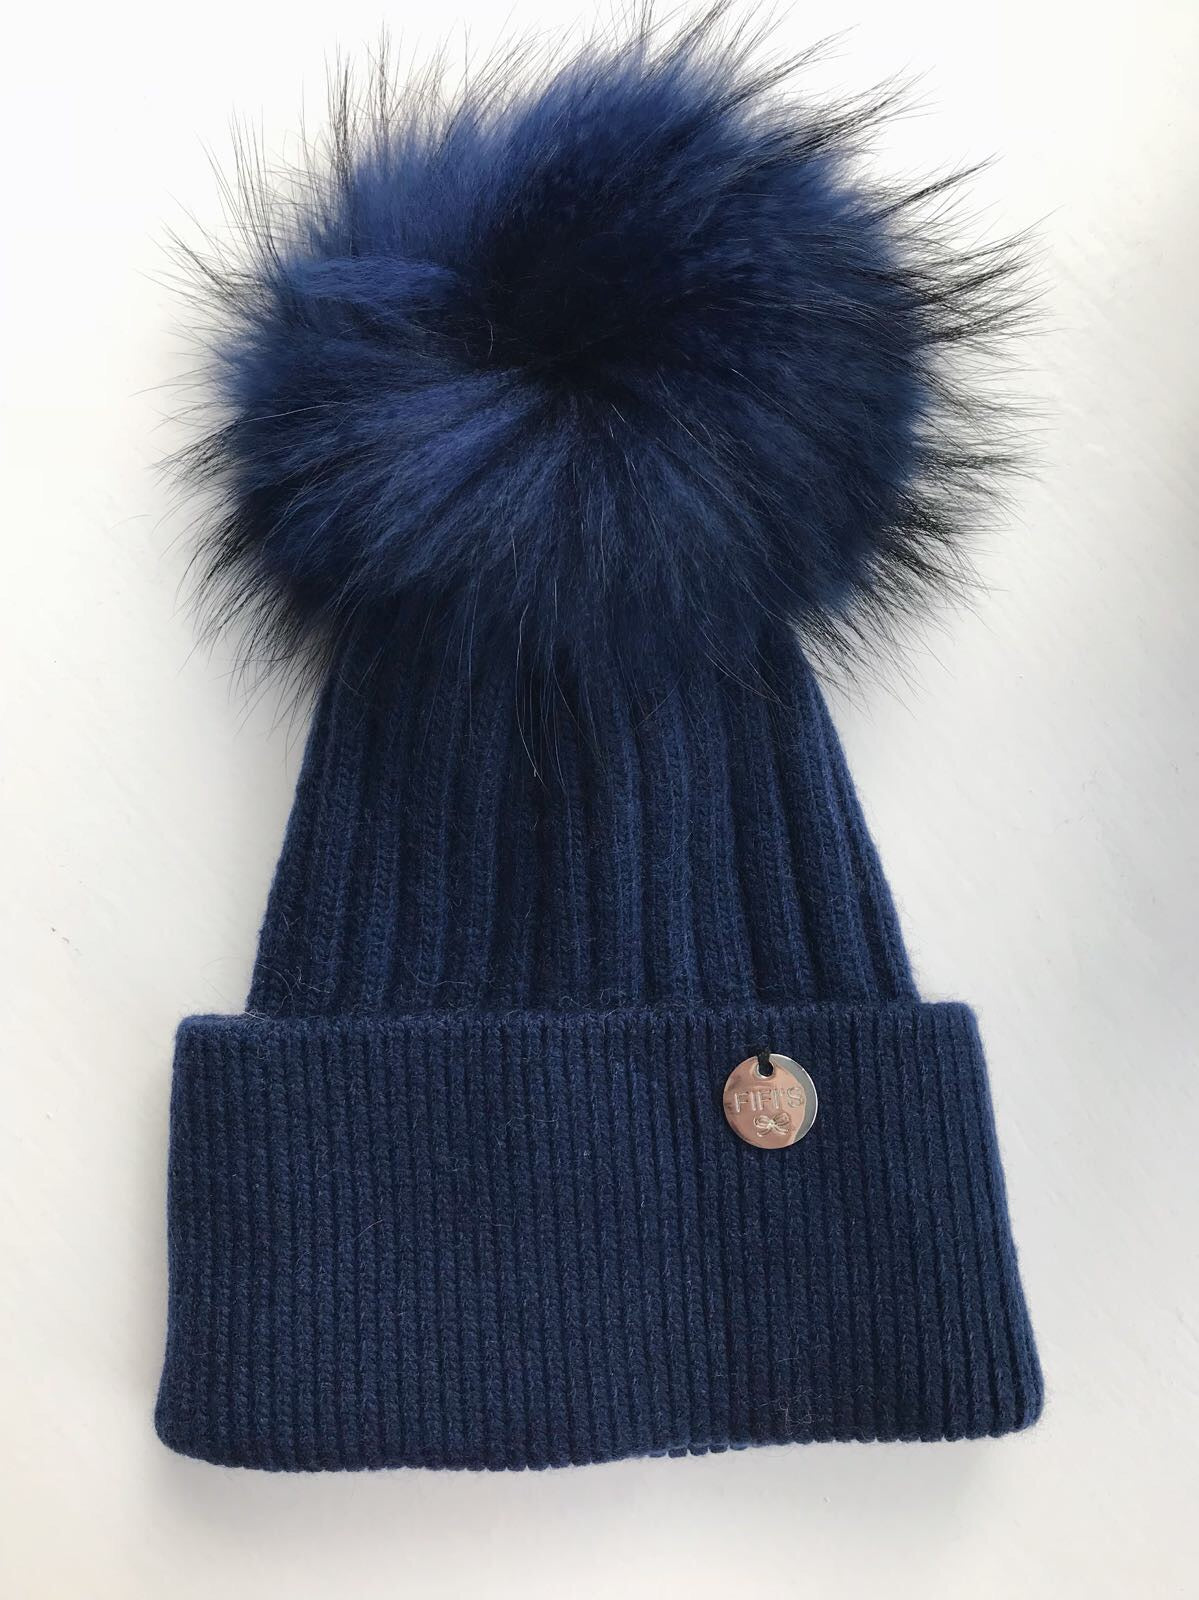 Cashmere single - Navy with matching pom